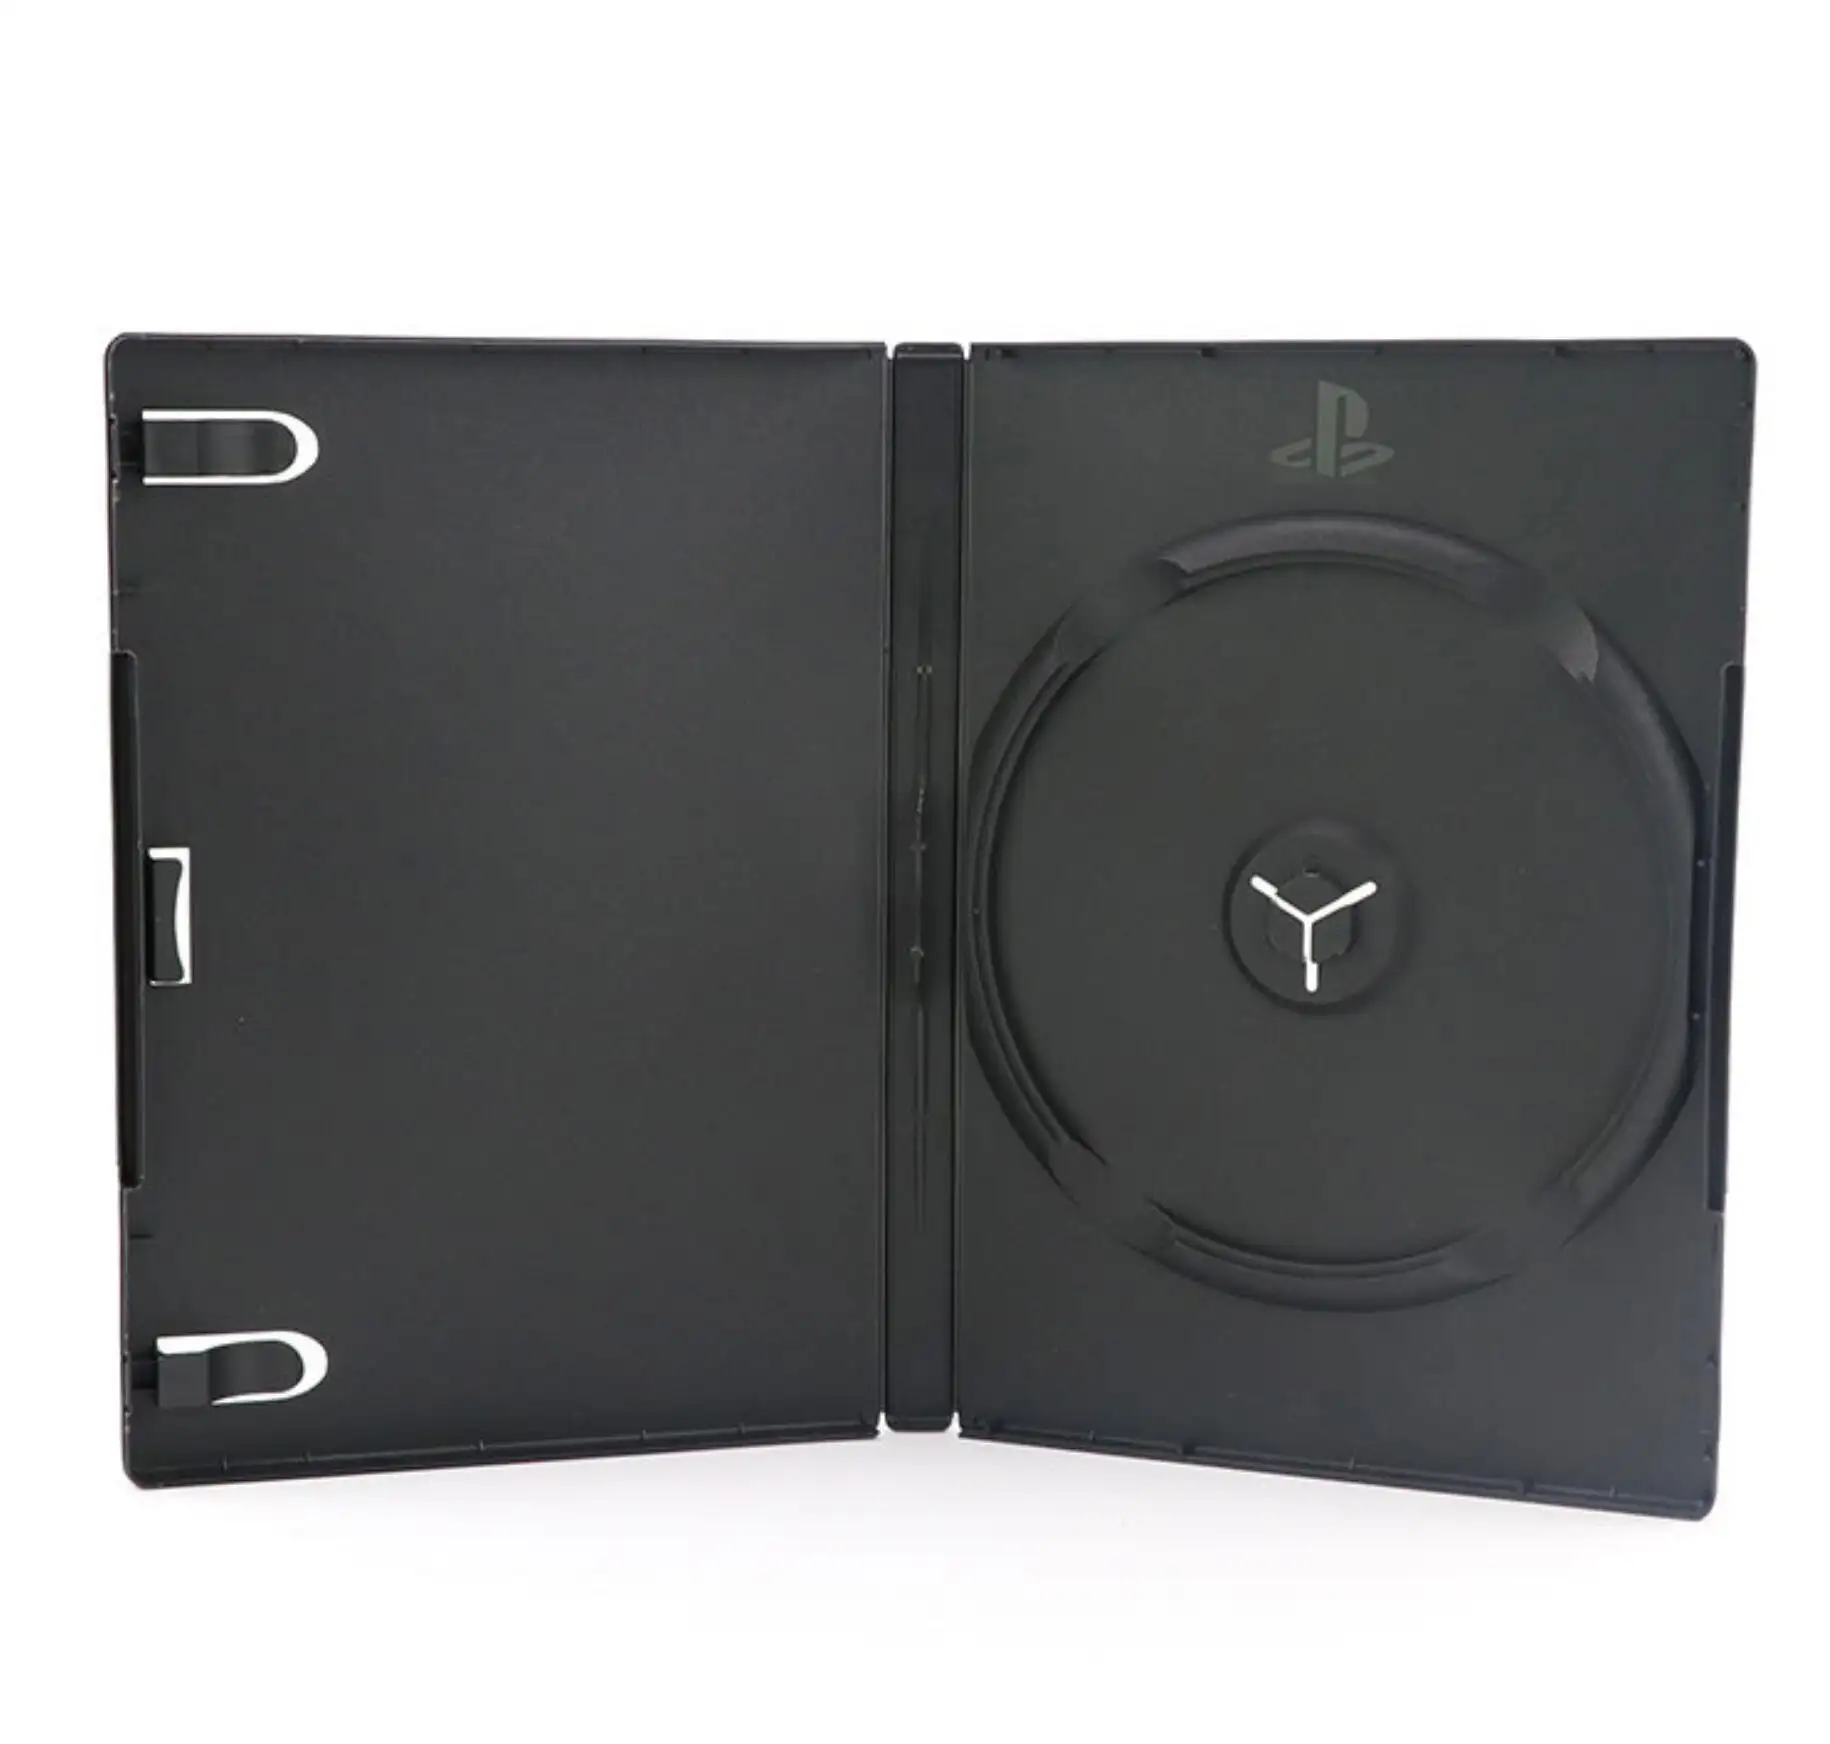 Replacement for Playstation 2 Video Game Accessories Black Color PS2 Game Cases With PS2 Logo